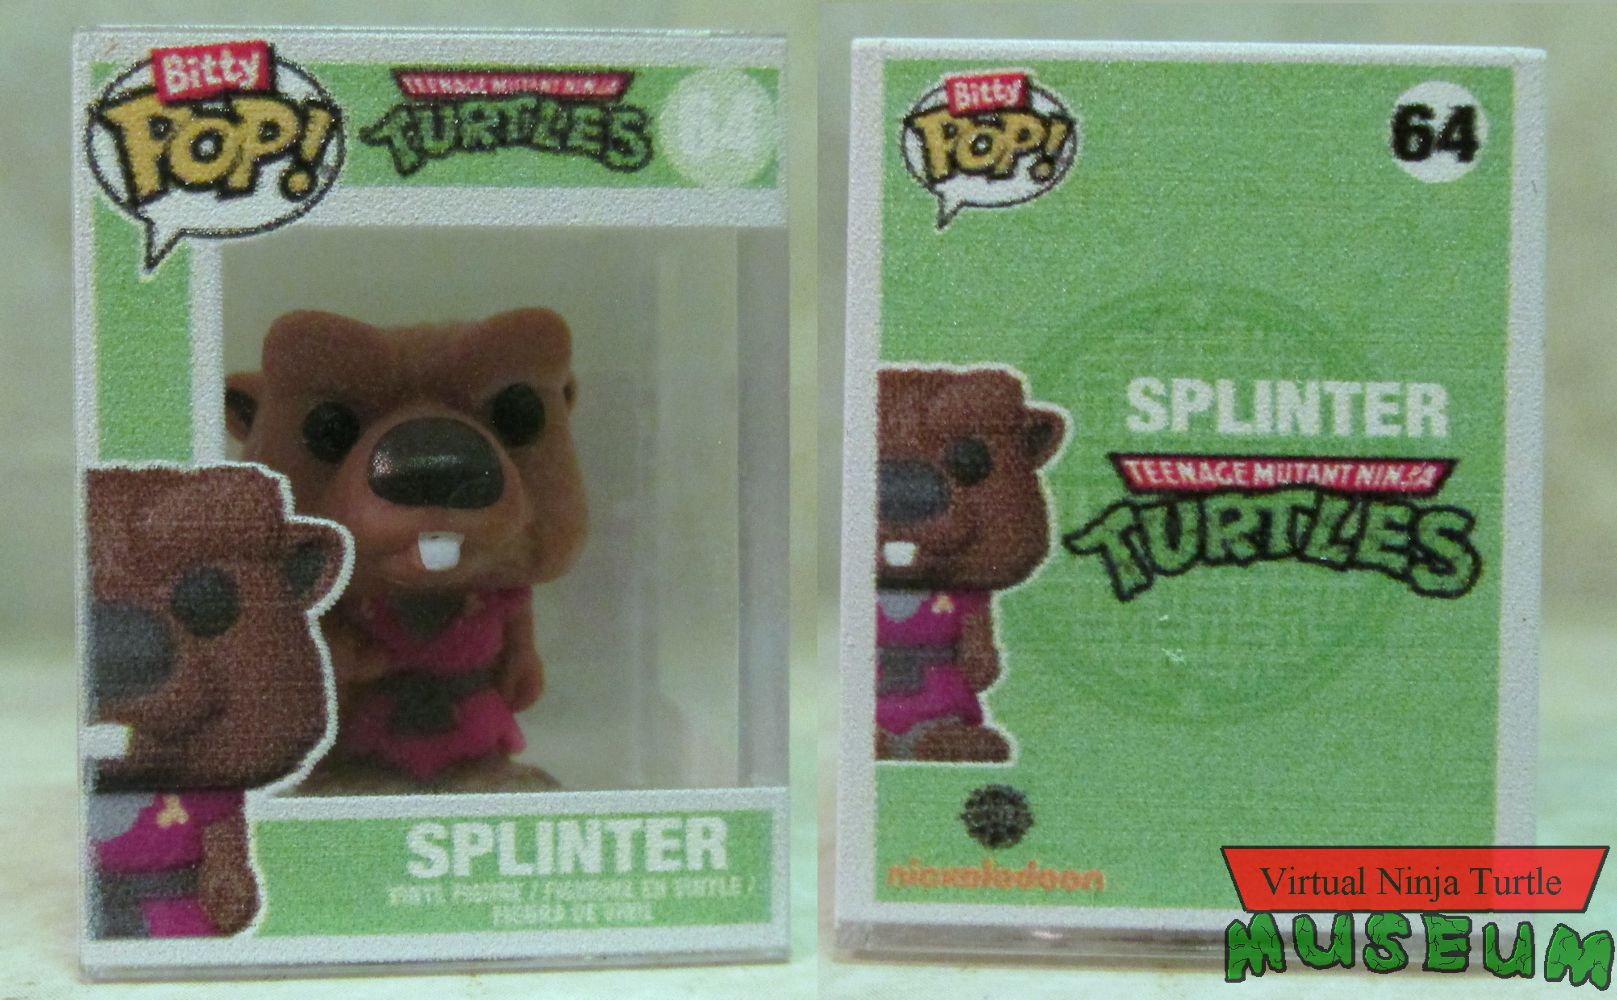 Splinter in case front and back